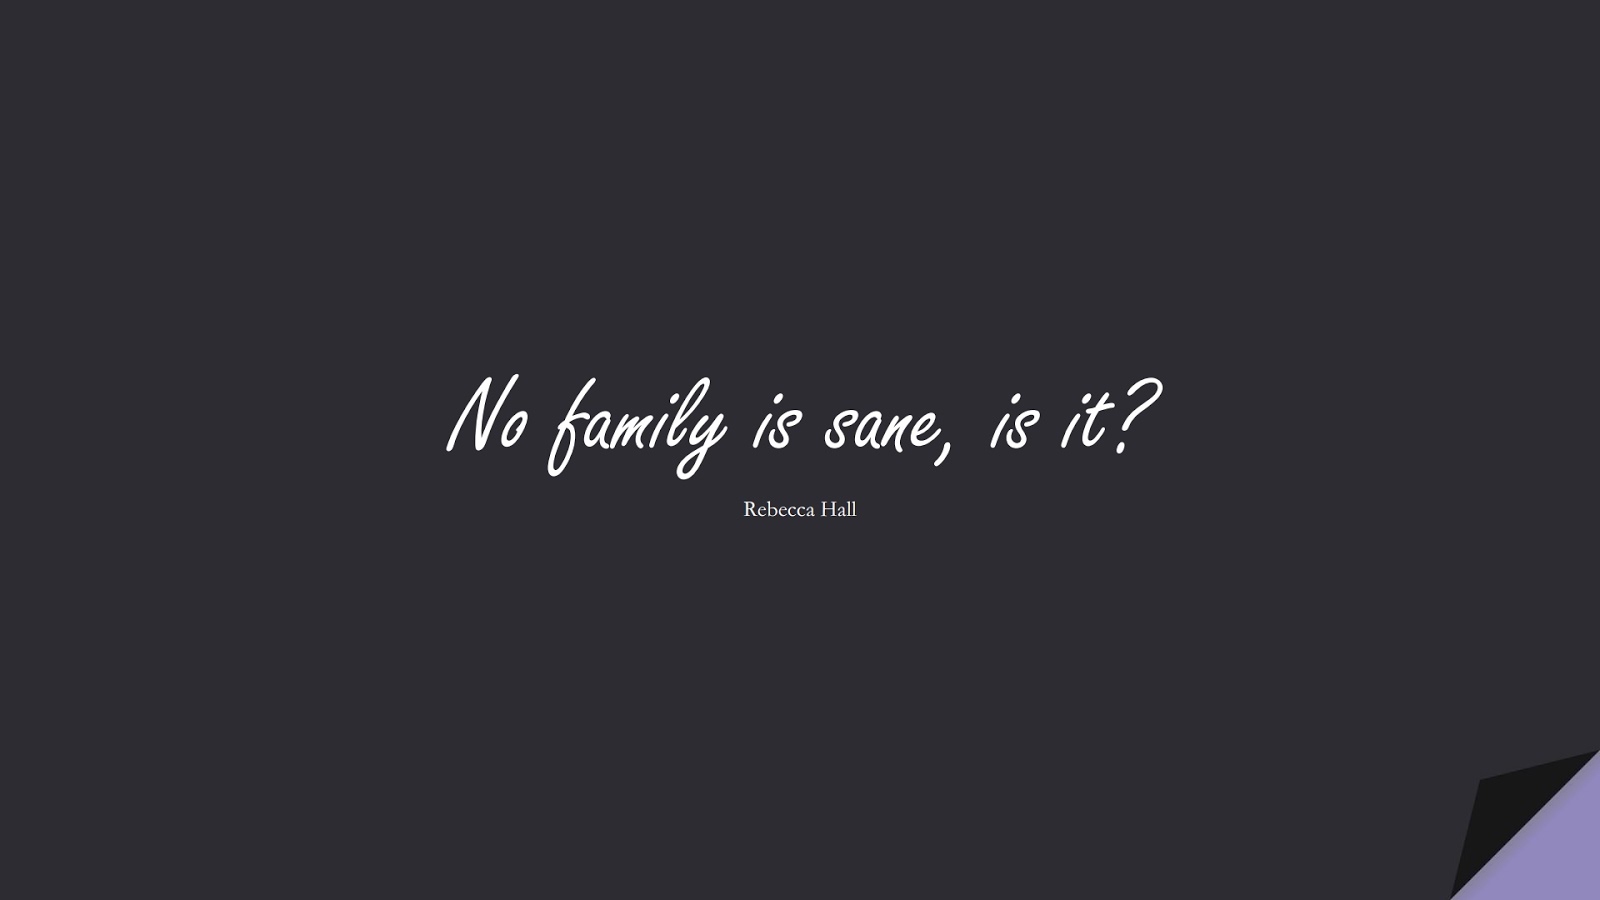 No family is sane, is it? (Rebecca Hall);  #FamilyQuotes